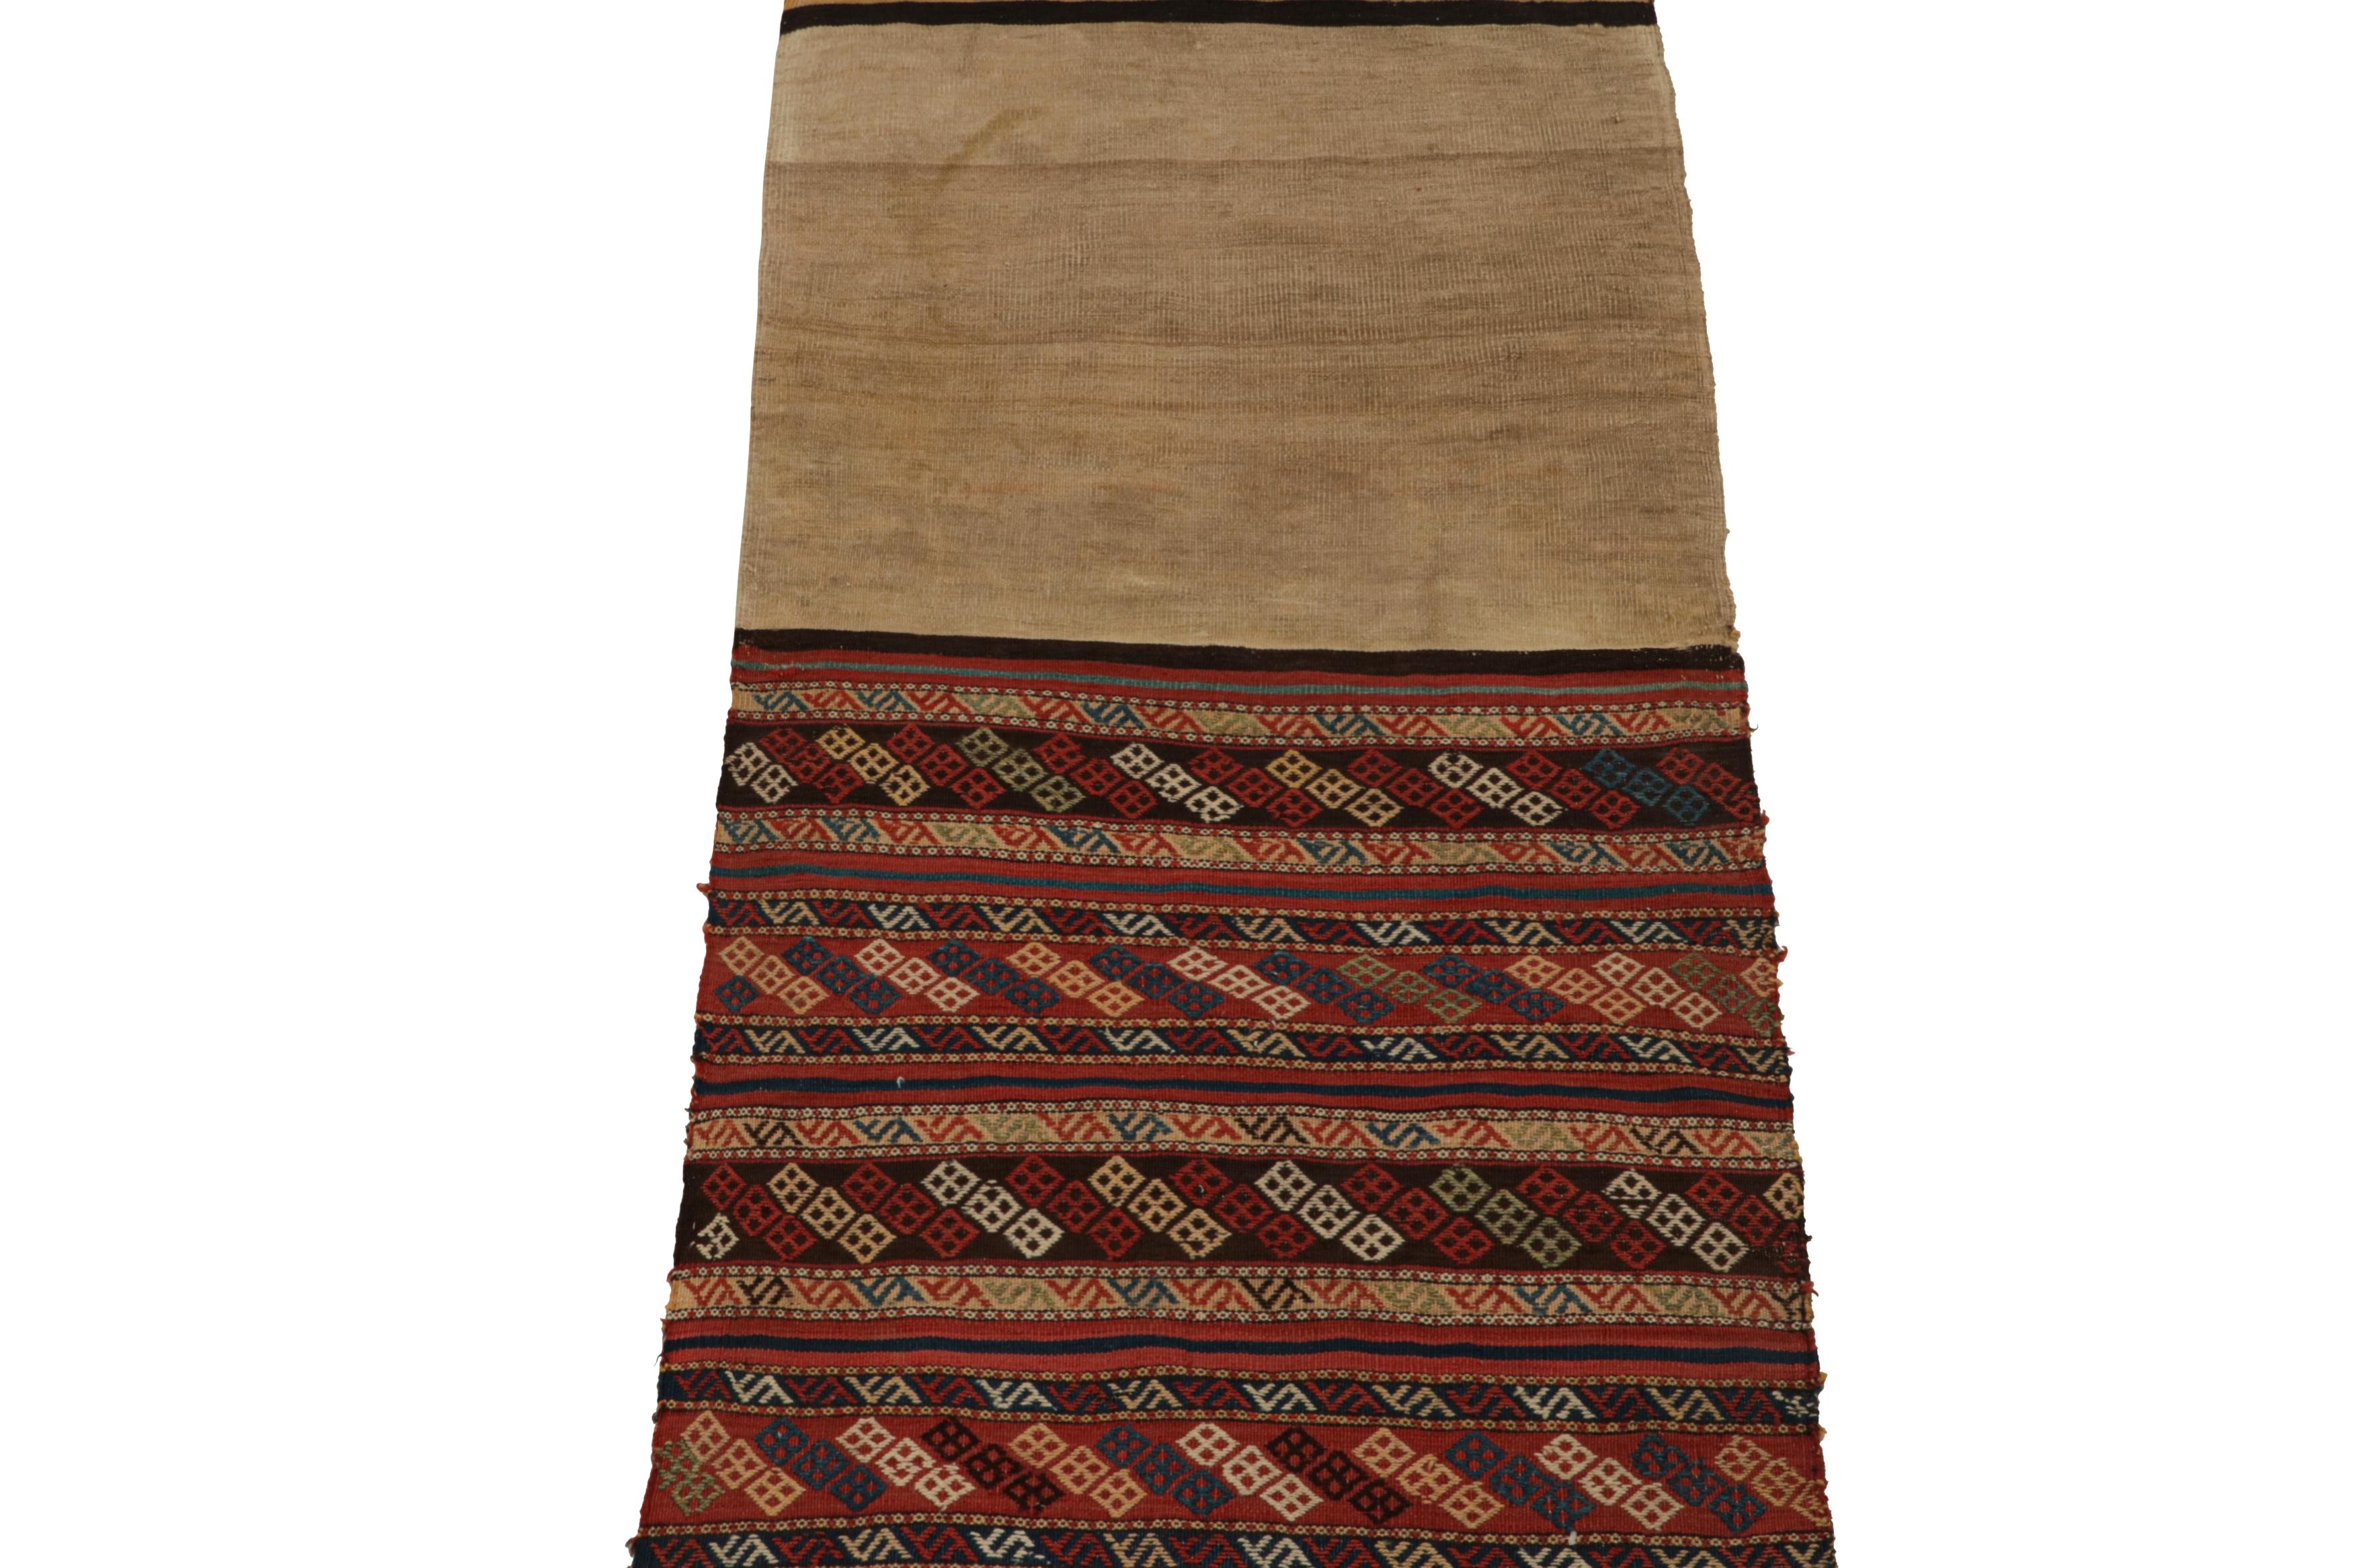 Handwoven in wool circa 1910-1920, this 3x6 Kilim runner is an antique Persian bag—a collectible textile once used by nomadic tribes in their daily life.

On the Design:

Connoisseurs will note this piece has been opened up, similar to other tribal